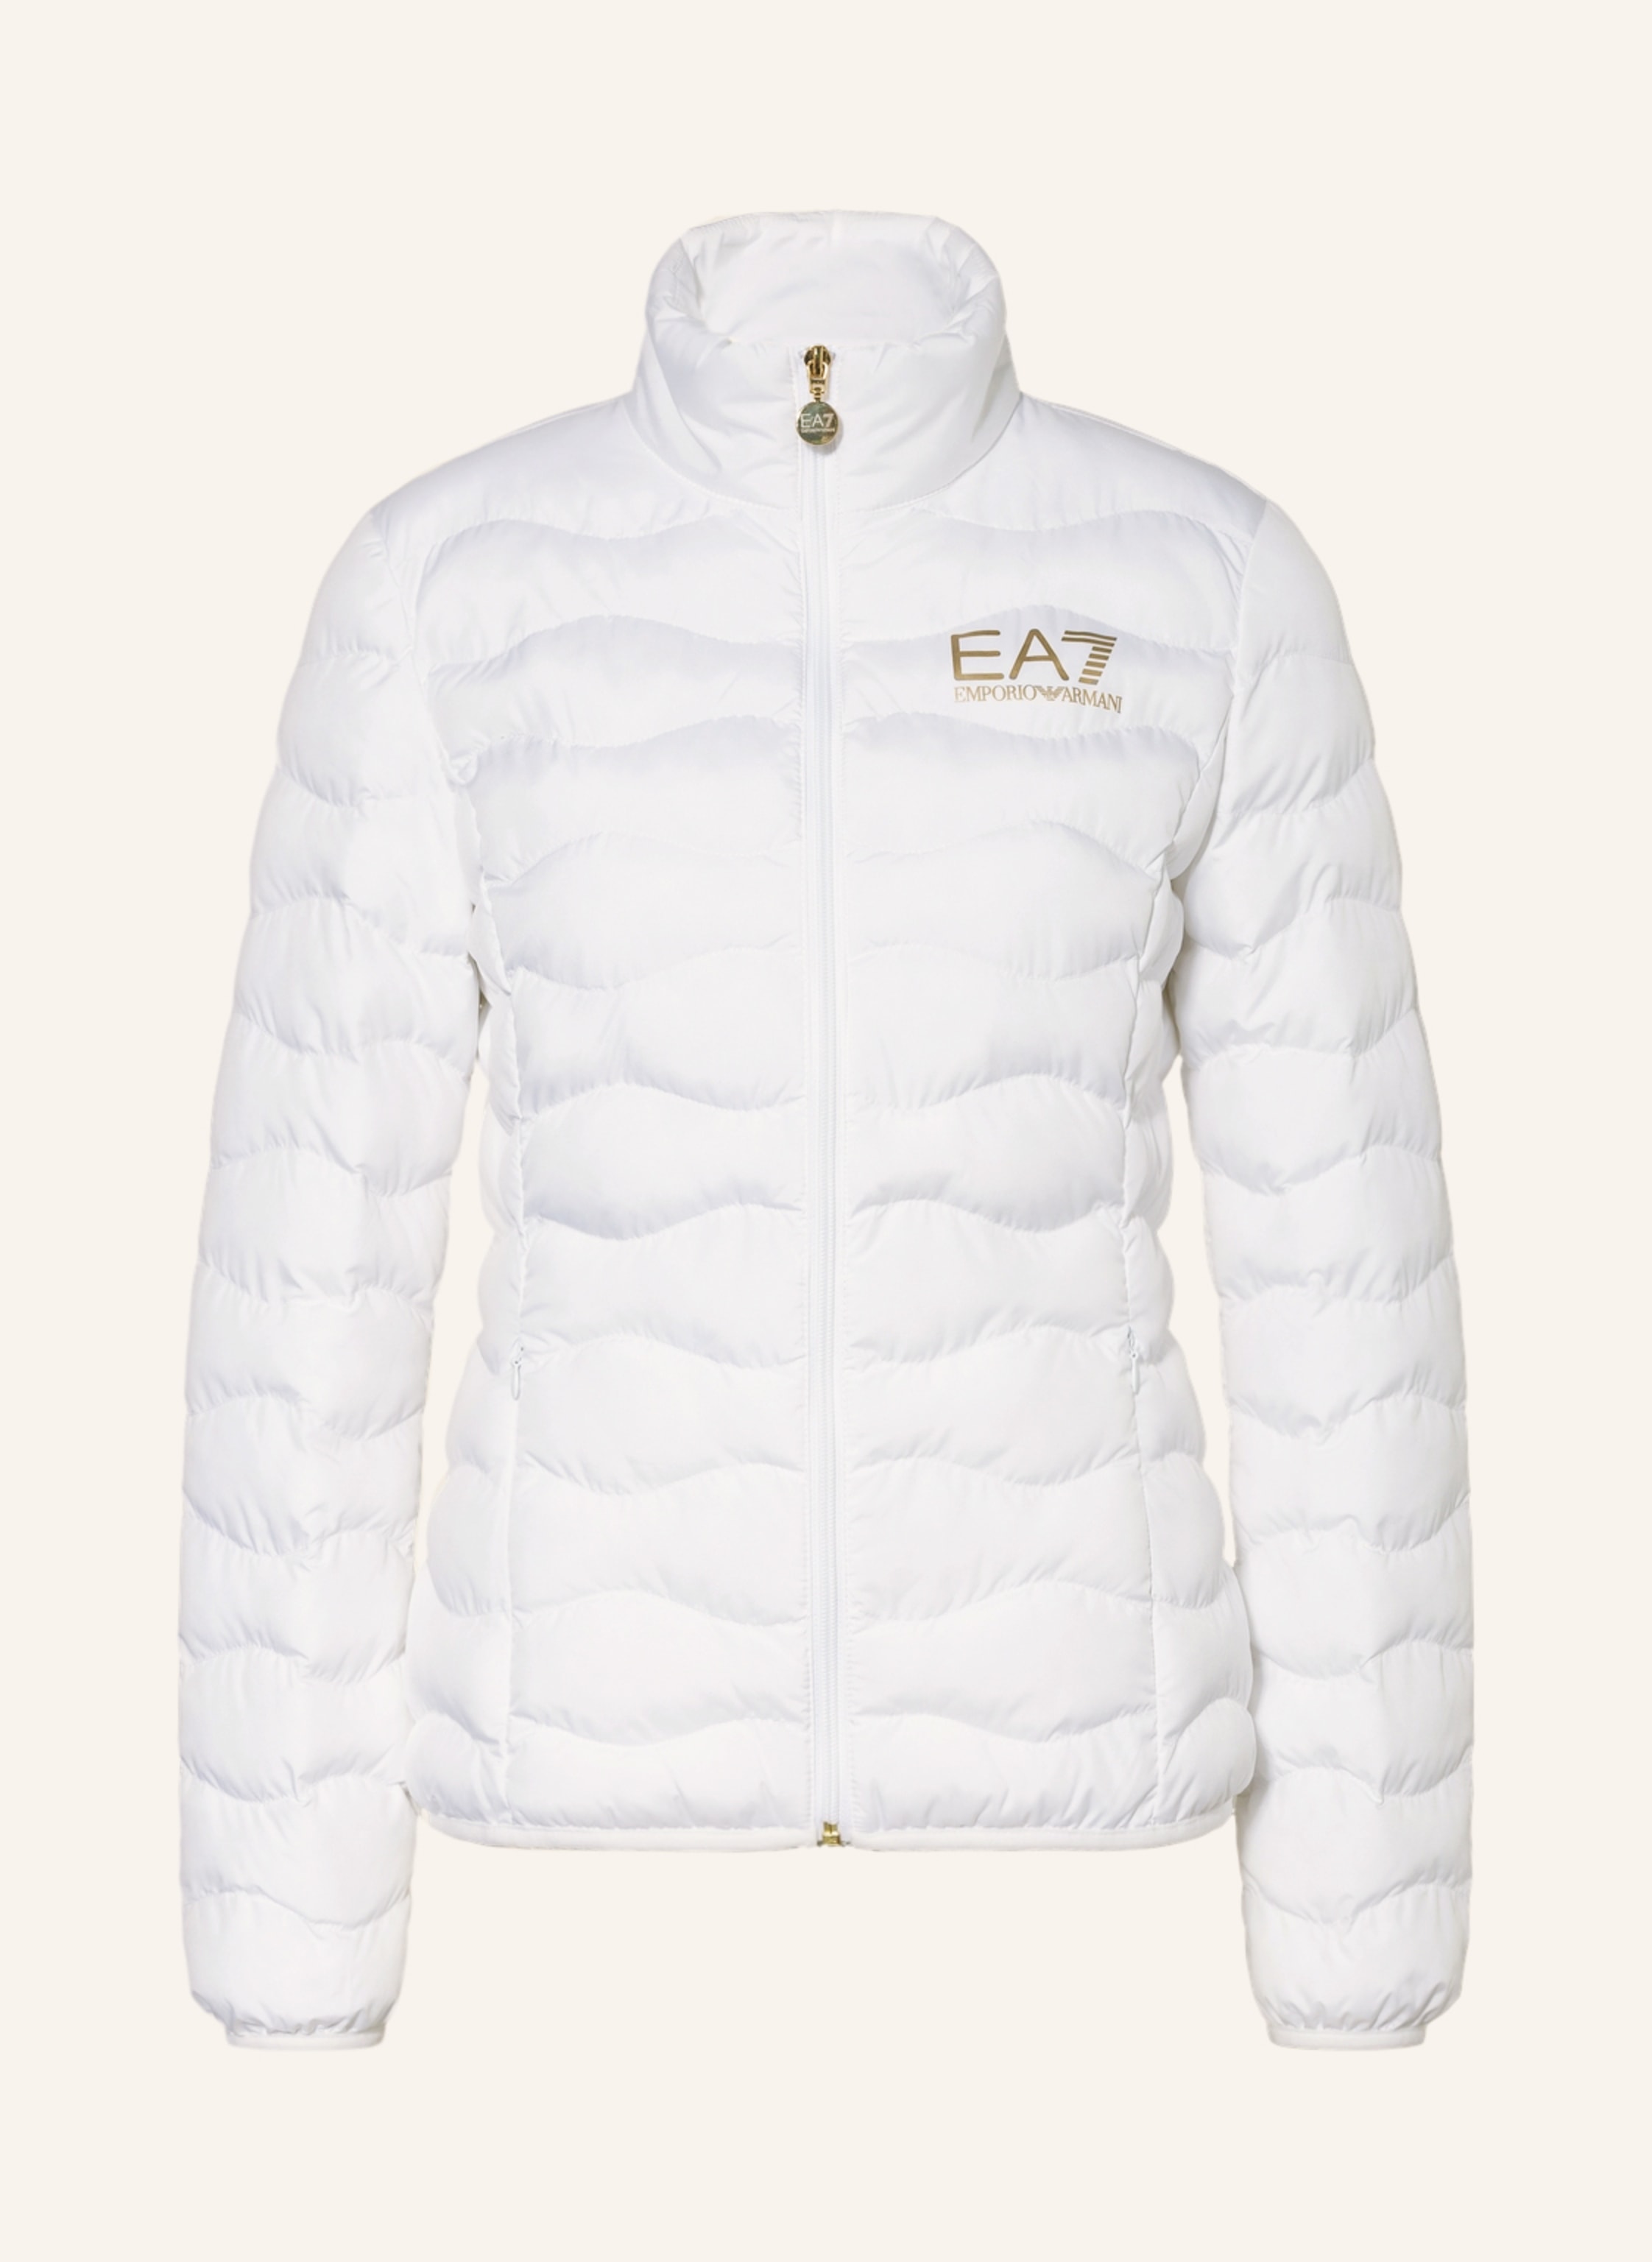 EA7 EMPORIO ARMANI Quilted jacket in white | Breuninger